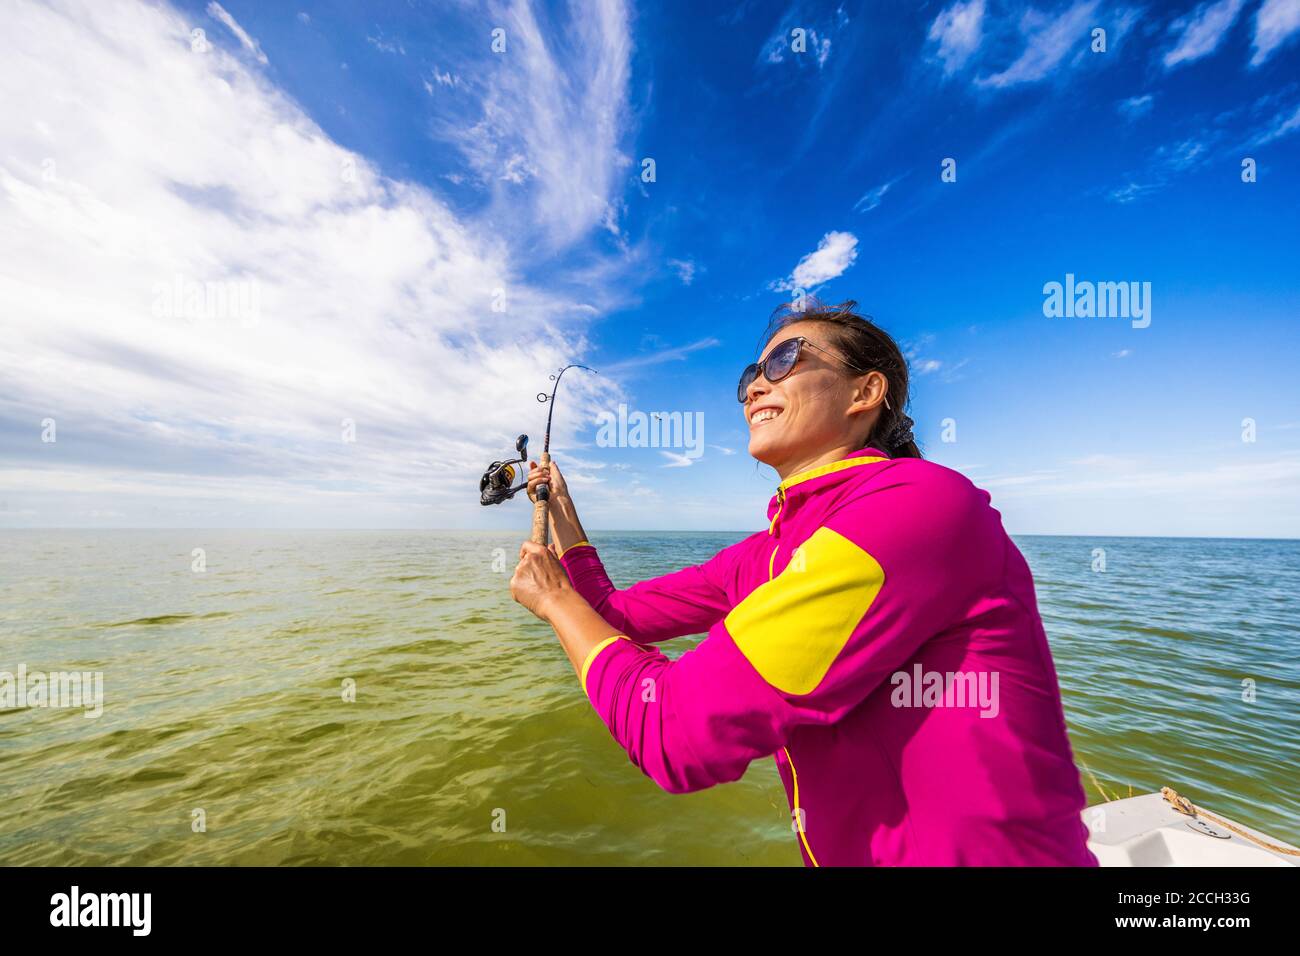 Fishing woman having fun learning to fish throwing casting line on ocean. Tourist on boat excursion Stock Photo